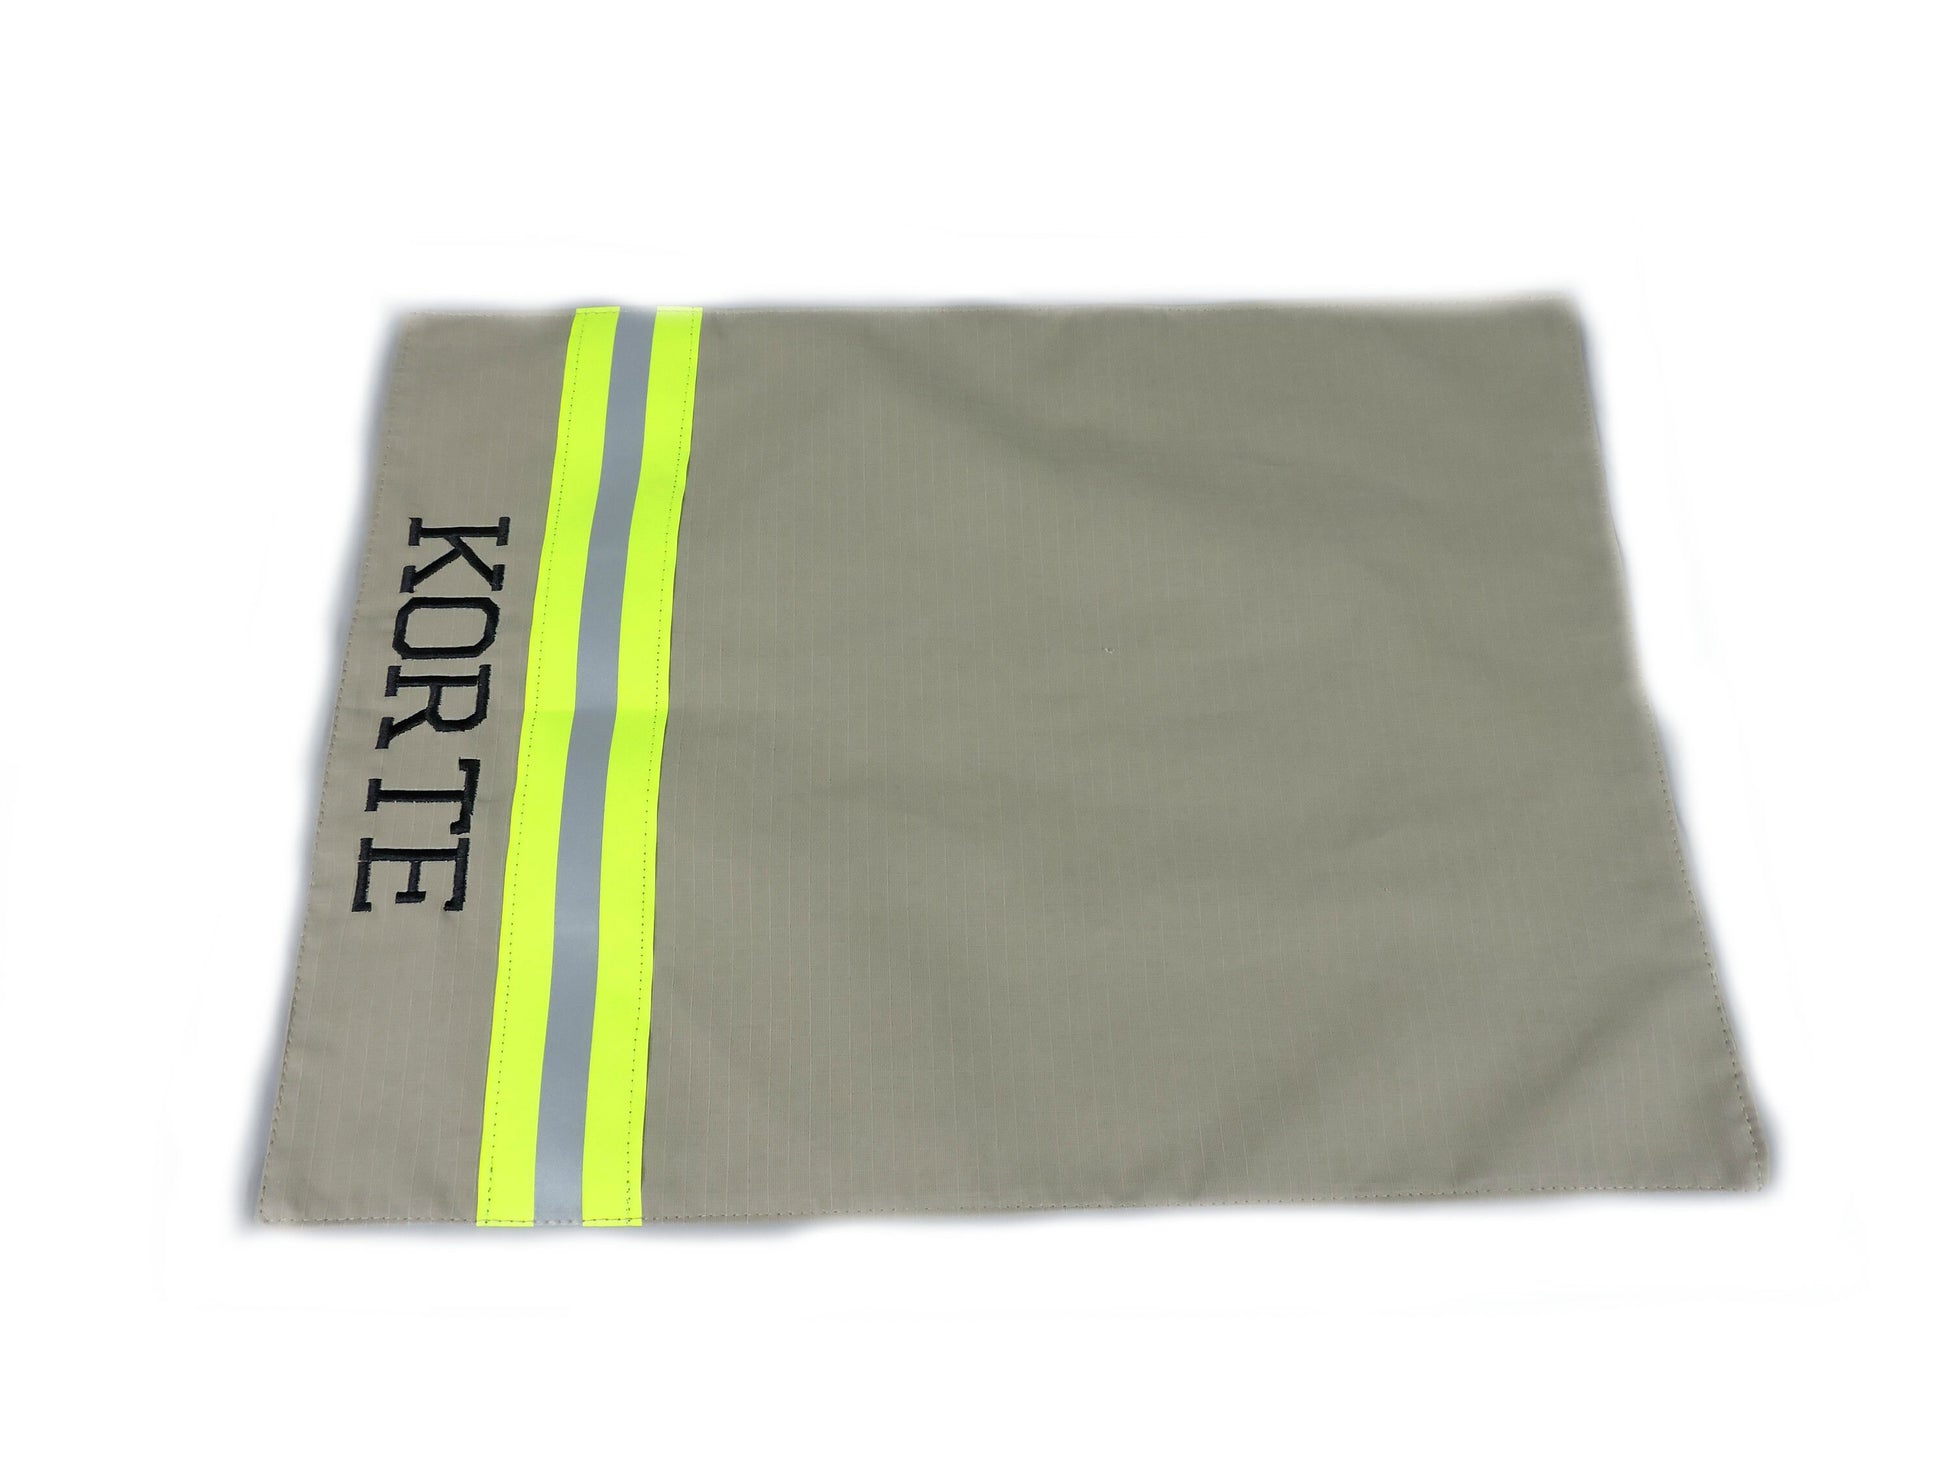 Tan fabric neon yellow reflective tape Firefighter Placemats